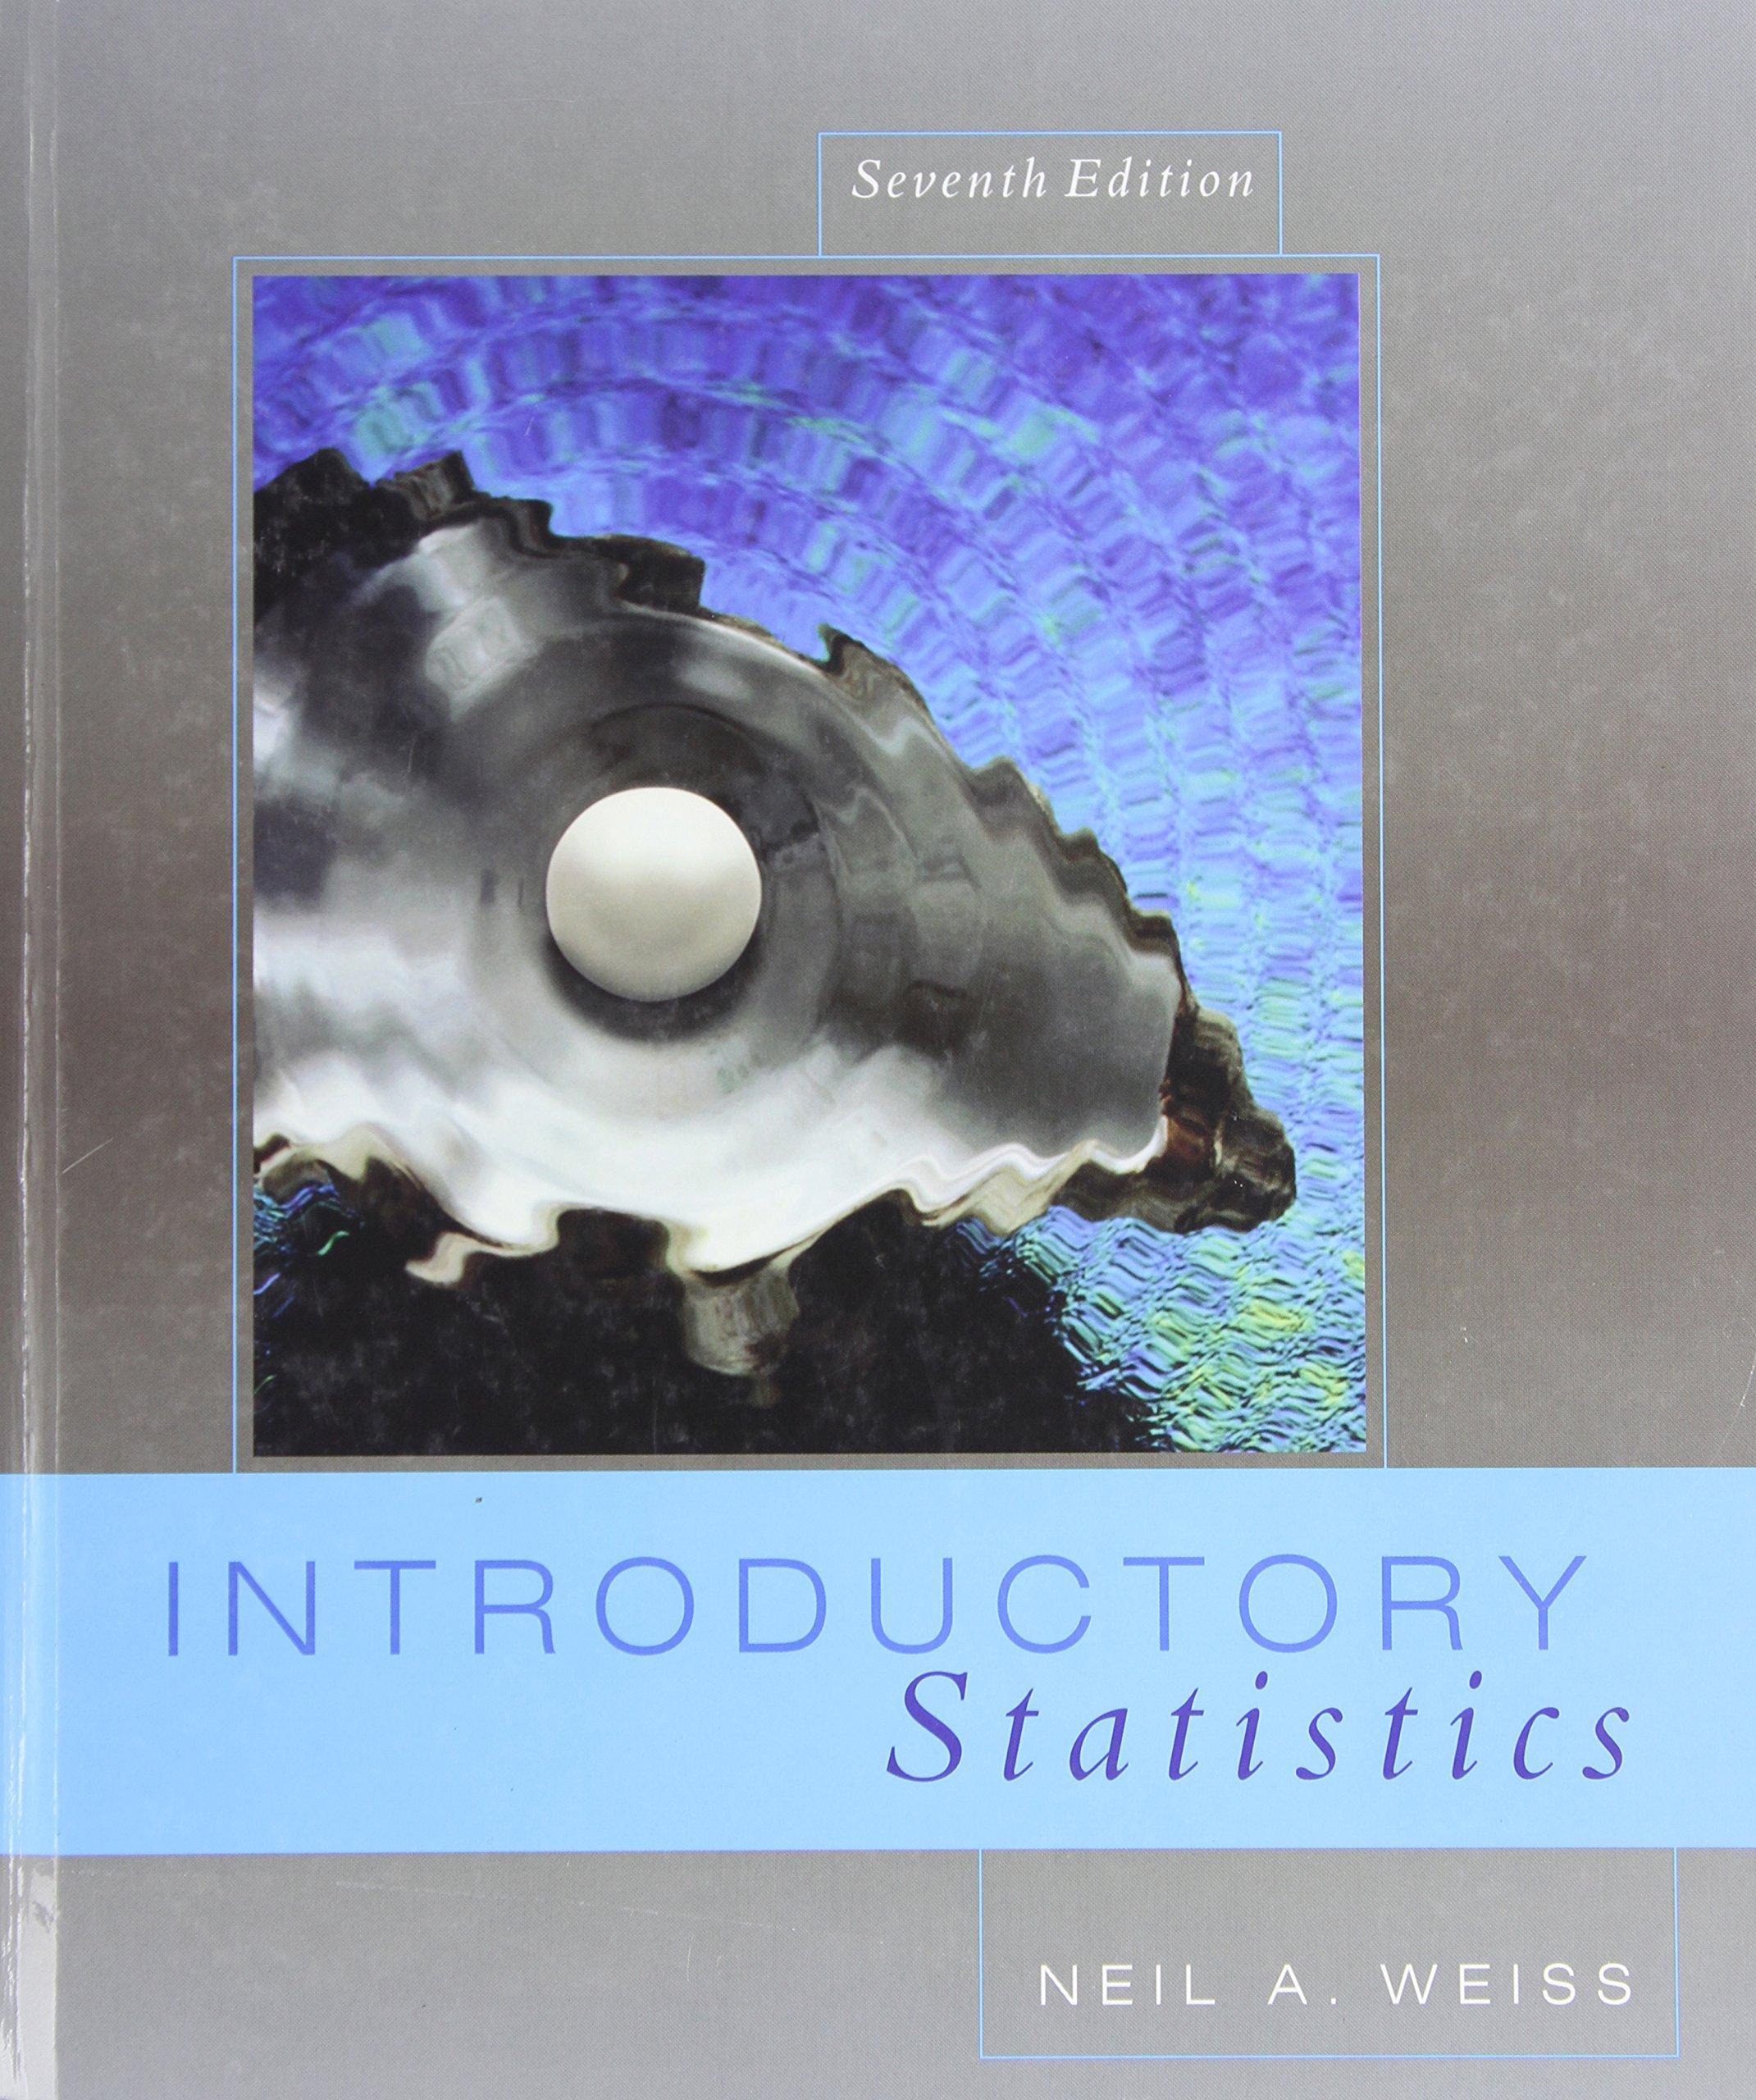 introductory statistics 7th edition neil a. weiss 0201771314, 978-0201771312